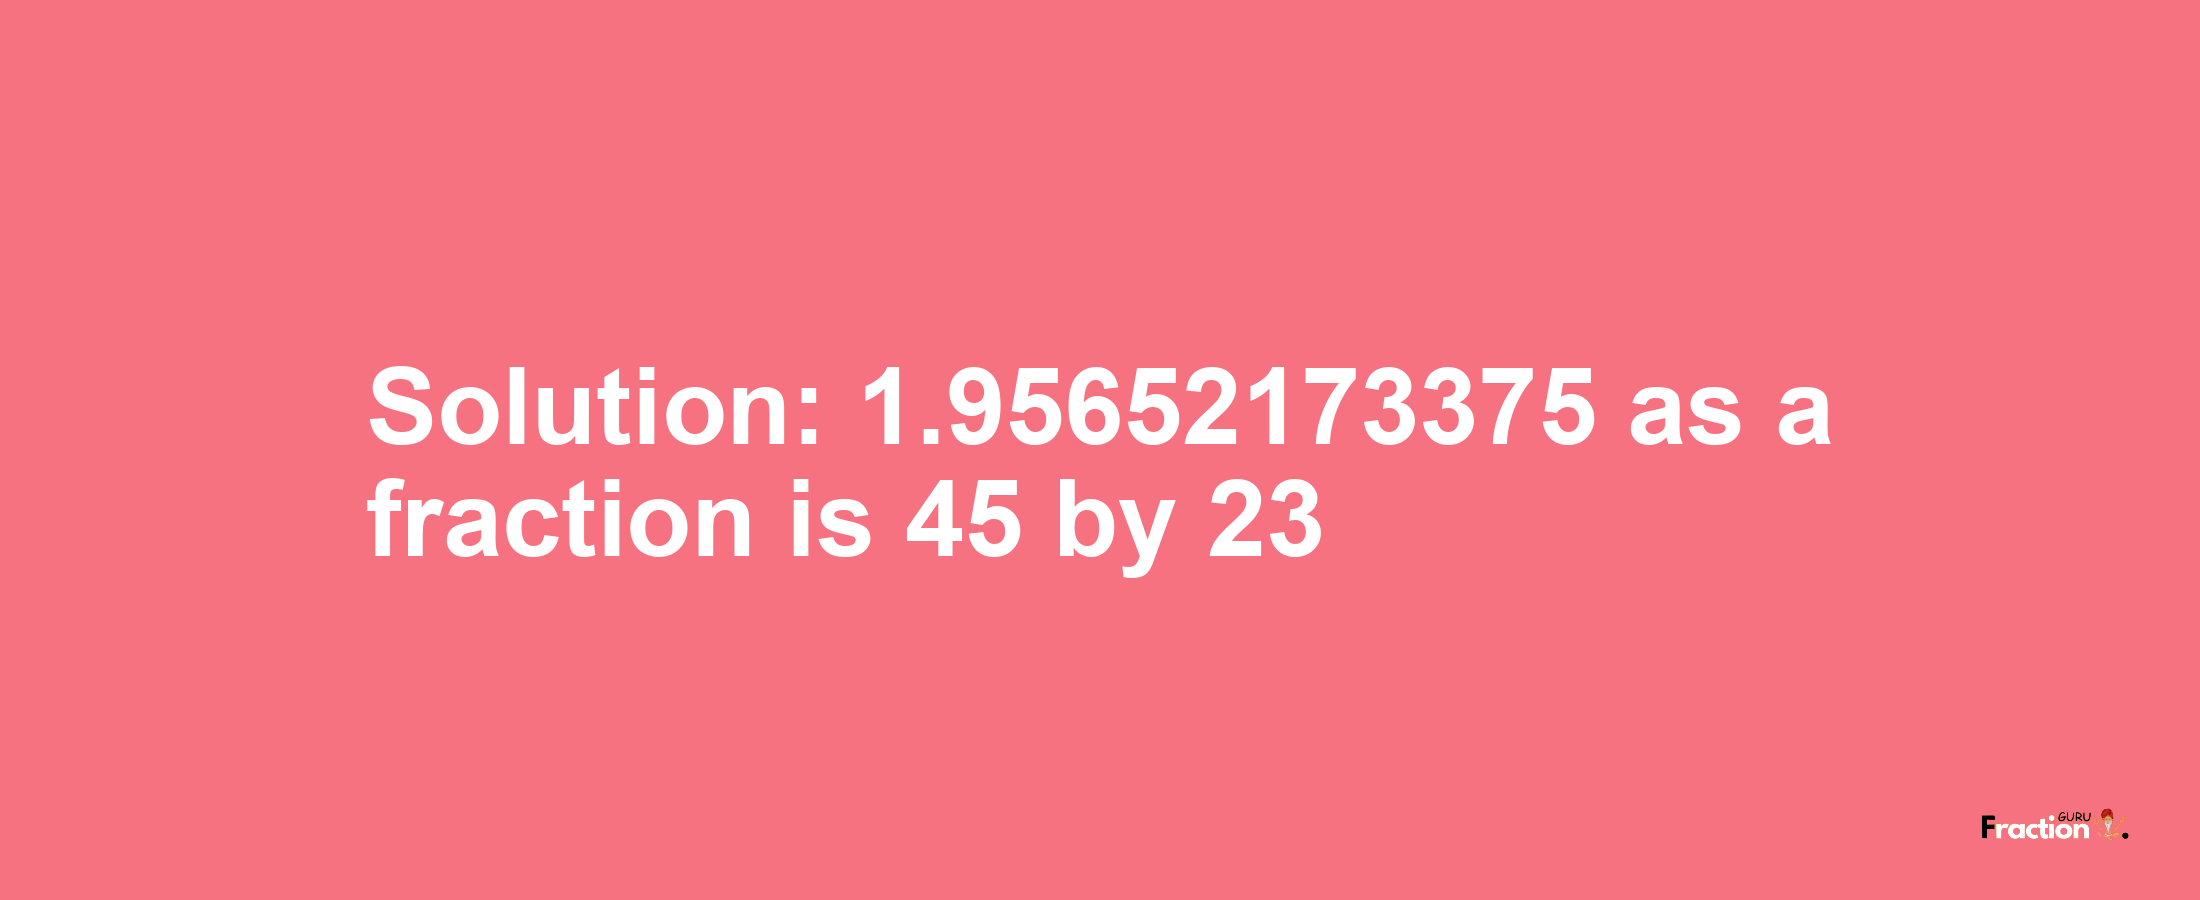 Solution:1.95652173375 as a fraction is 45/23